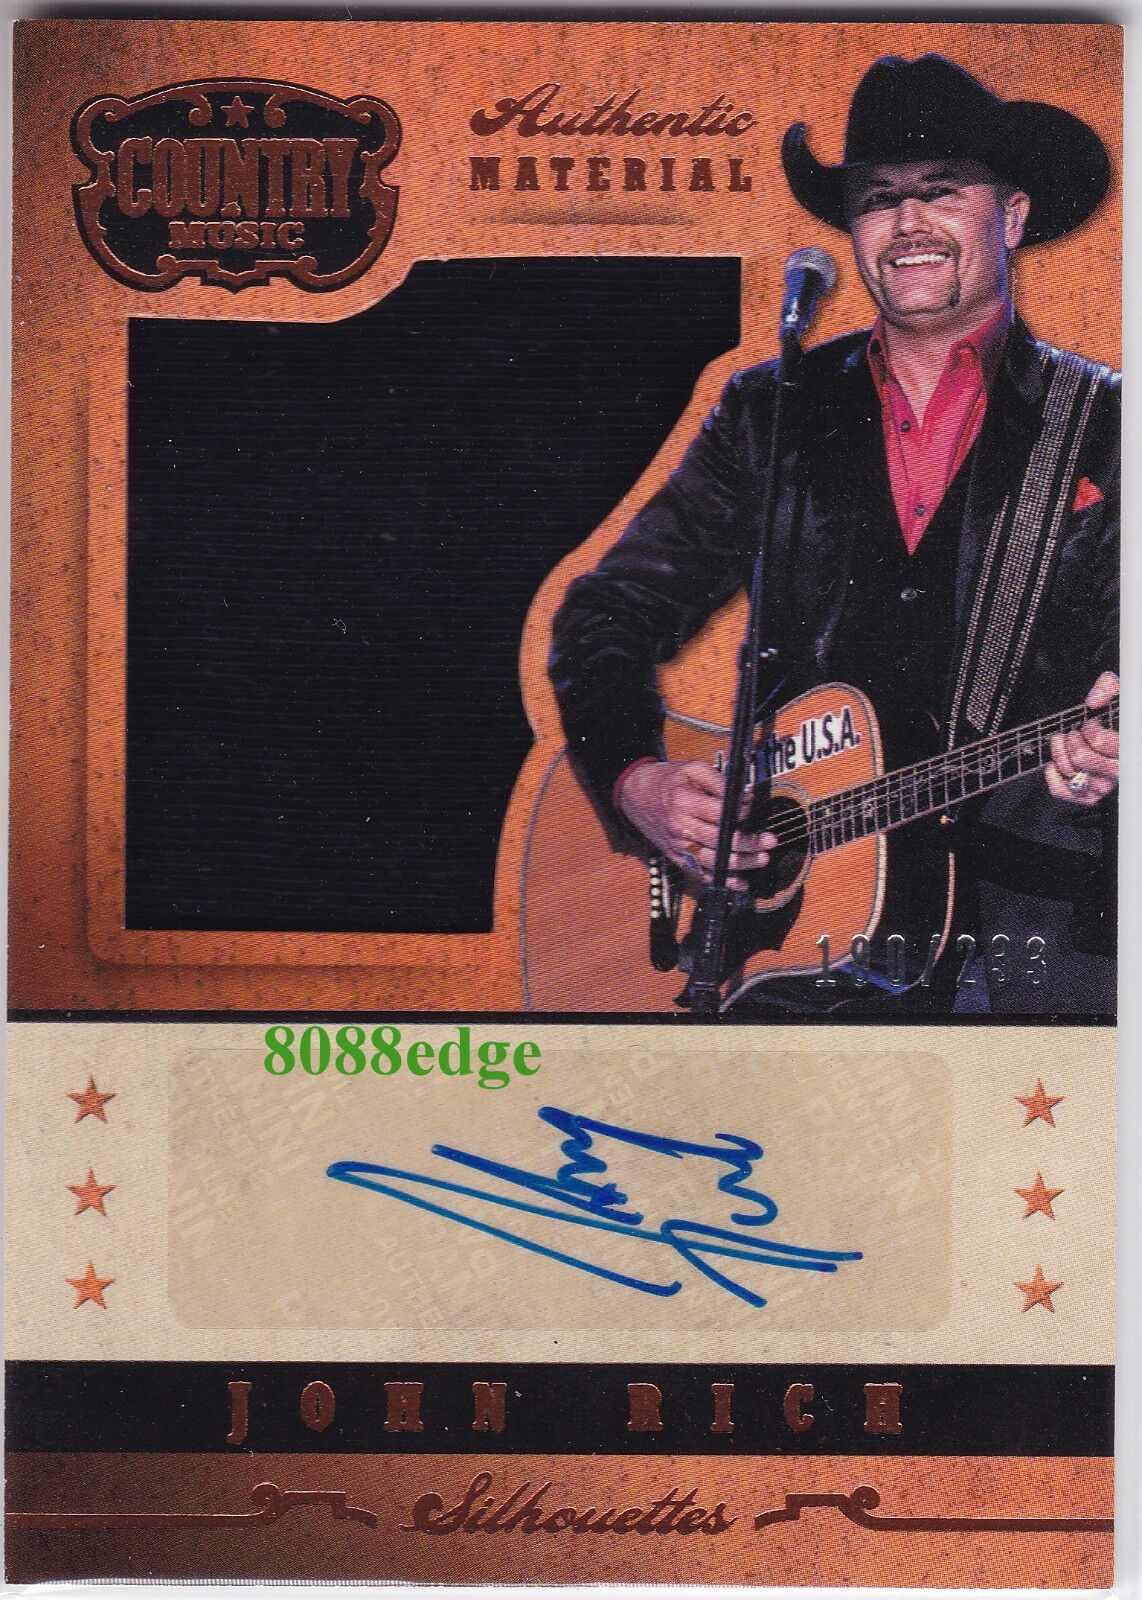 2014 PANINI COUNTRY MUSIC MATERIAL AUTO: JOHN RICH #/233 AUTOGRAPH SWATCH TRUMP